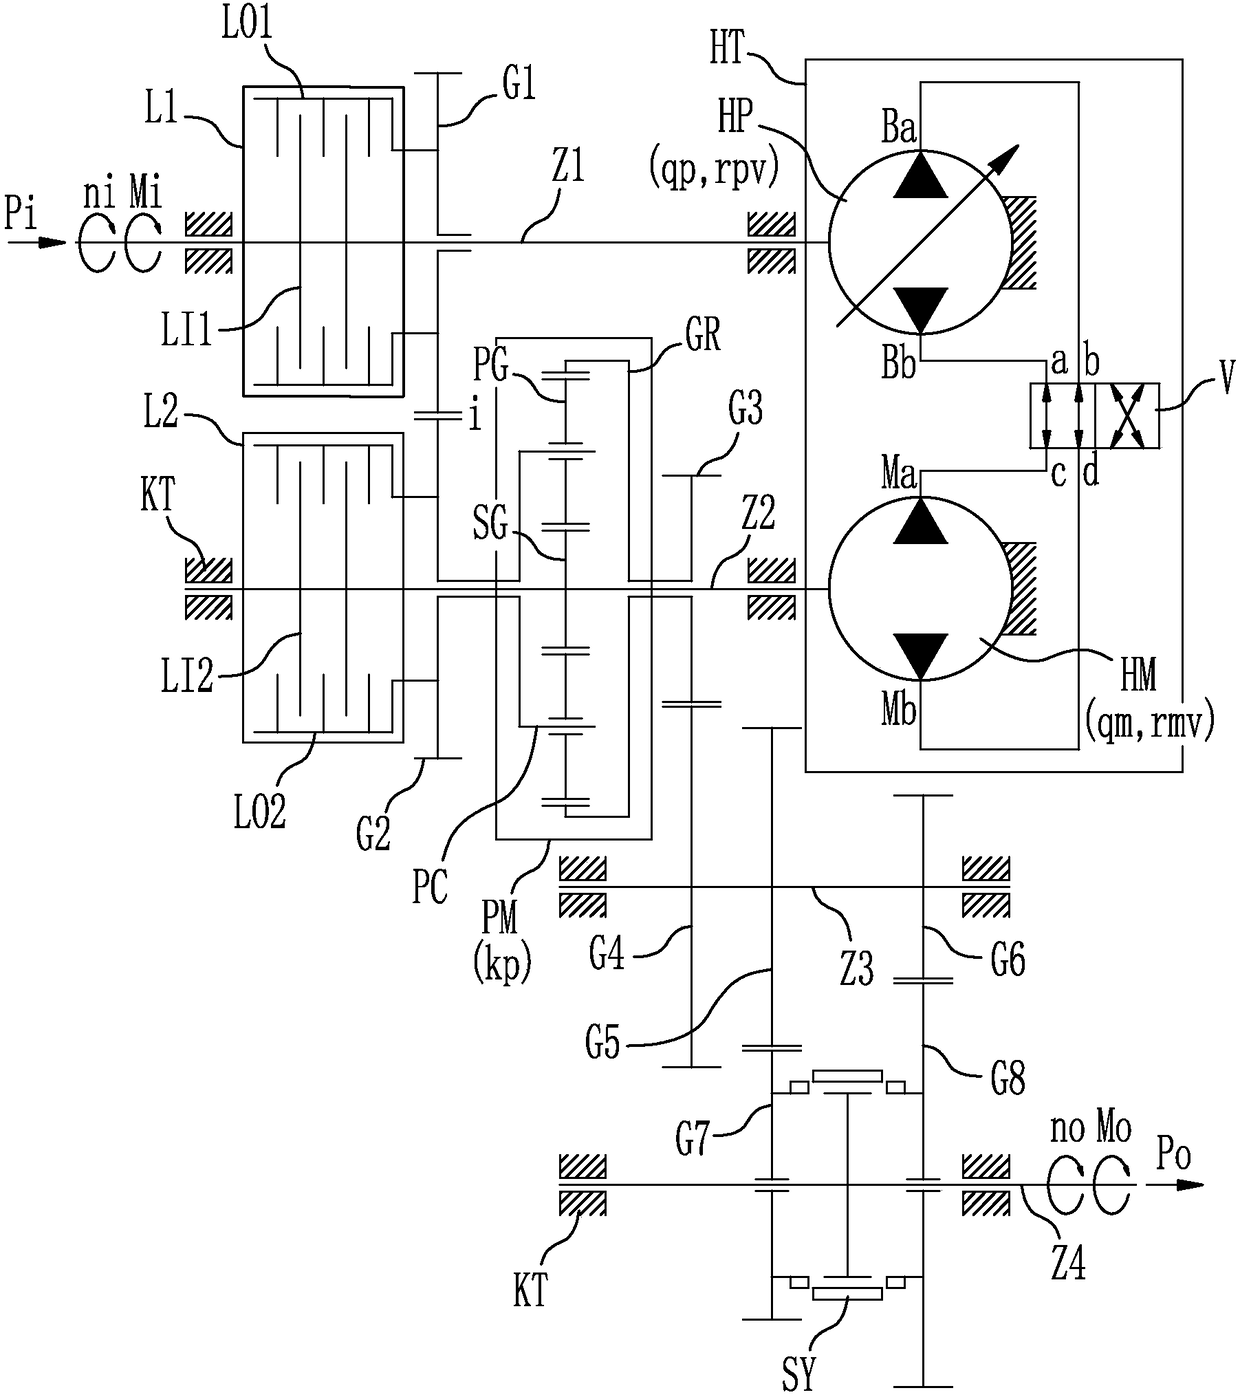 Transmission system capable of achieving three variable transmission processes